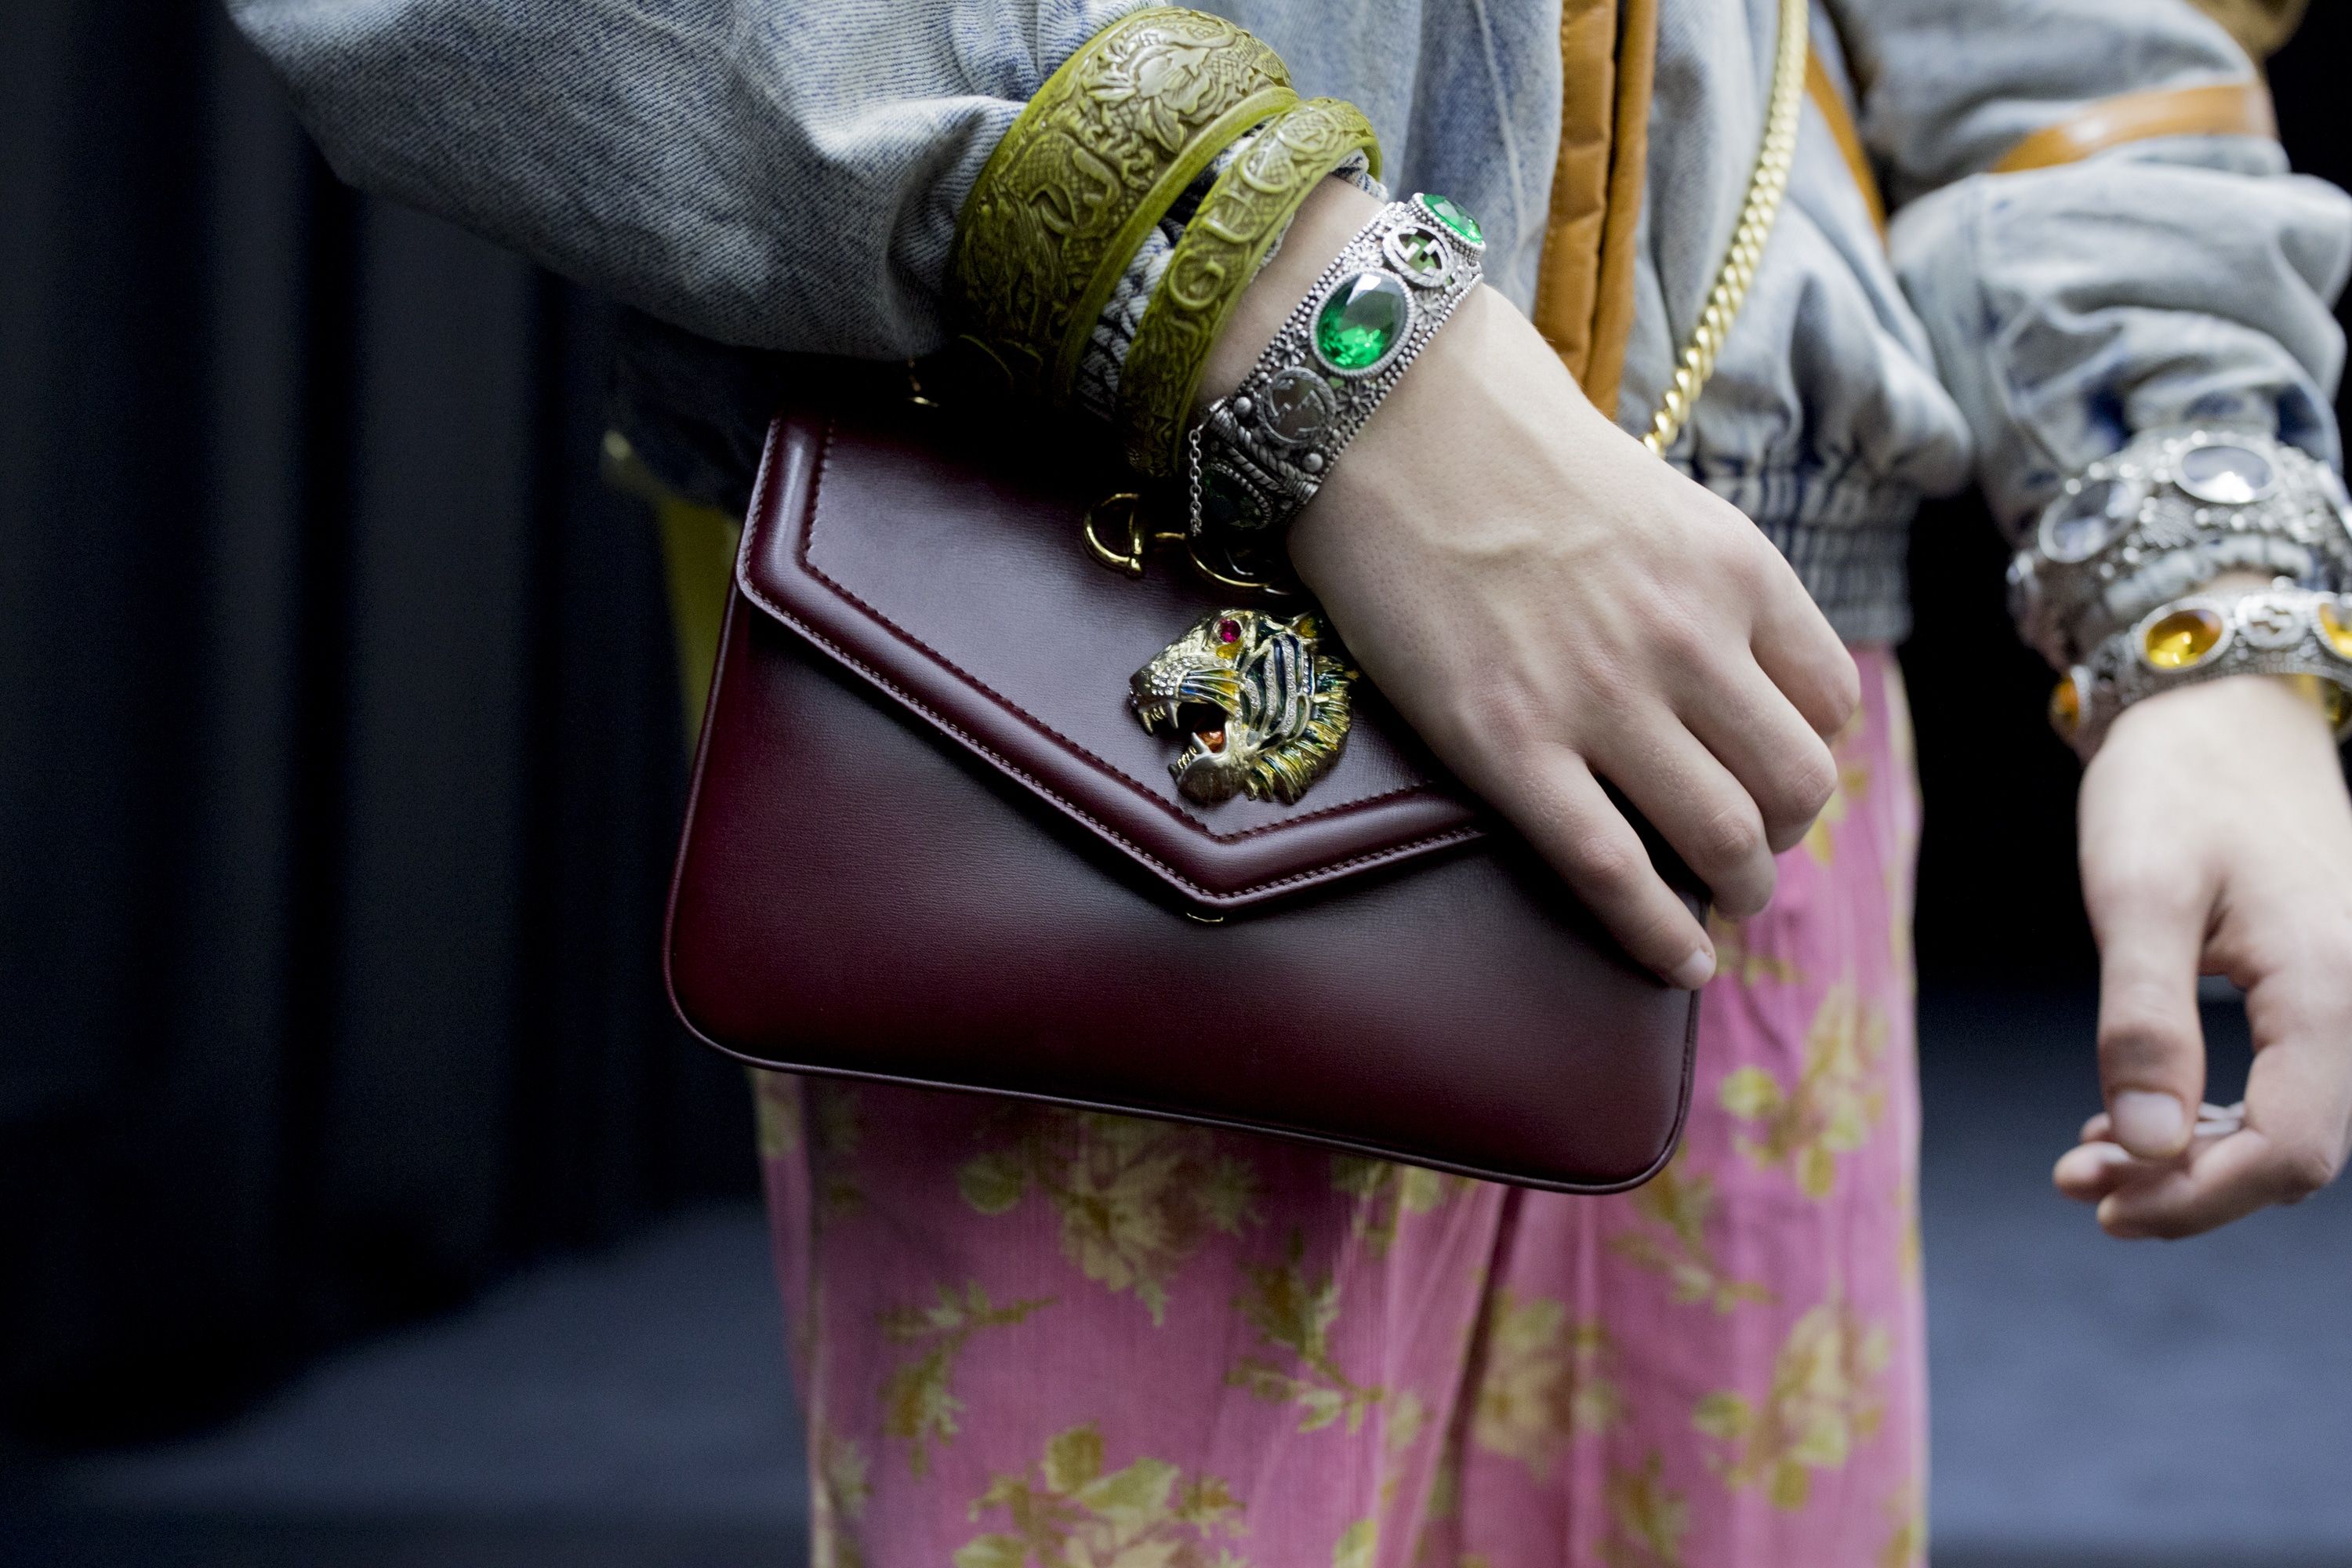 There’s a bit of India in Alessandro Michele’s latest Rajah bag line for Gucci